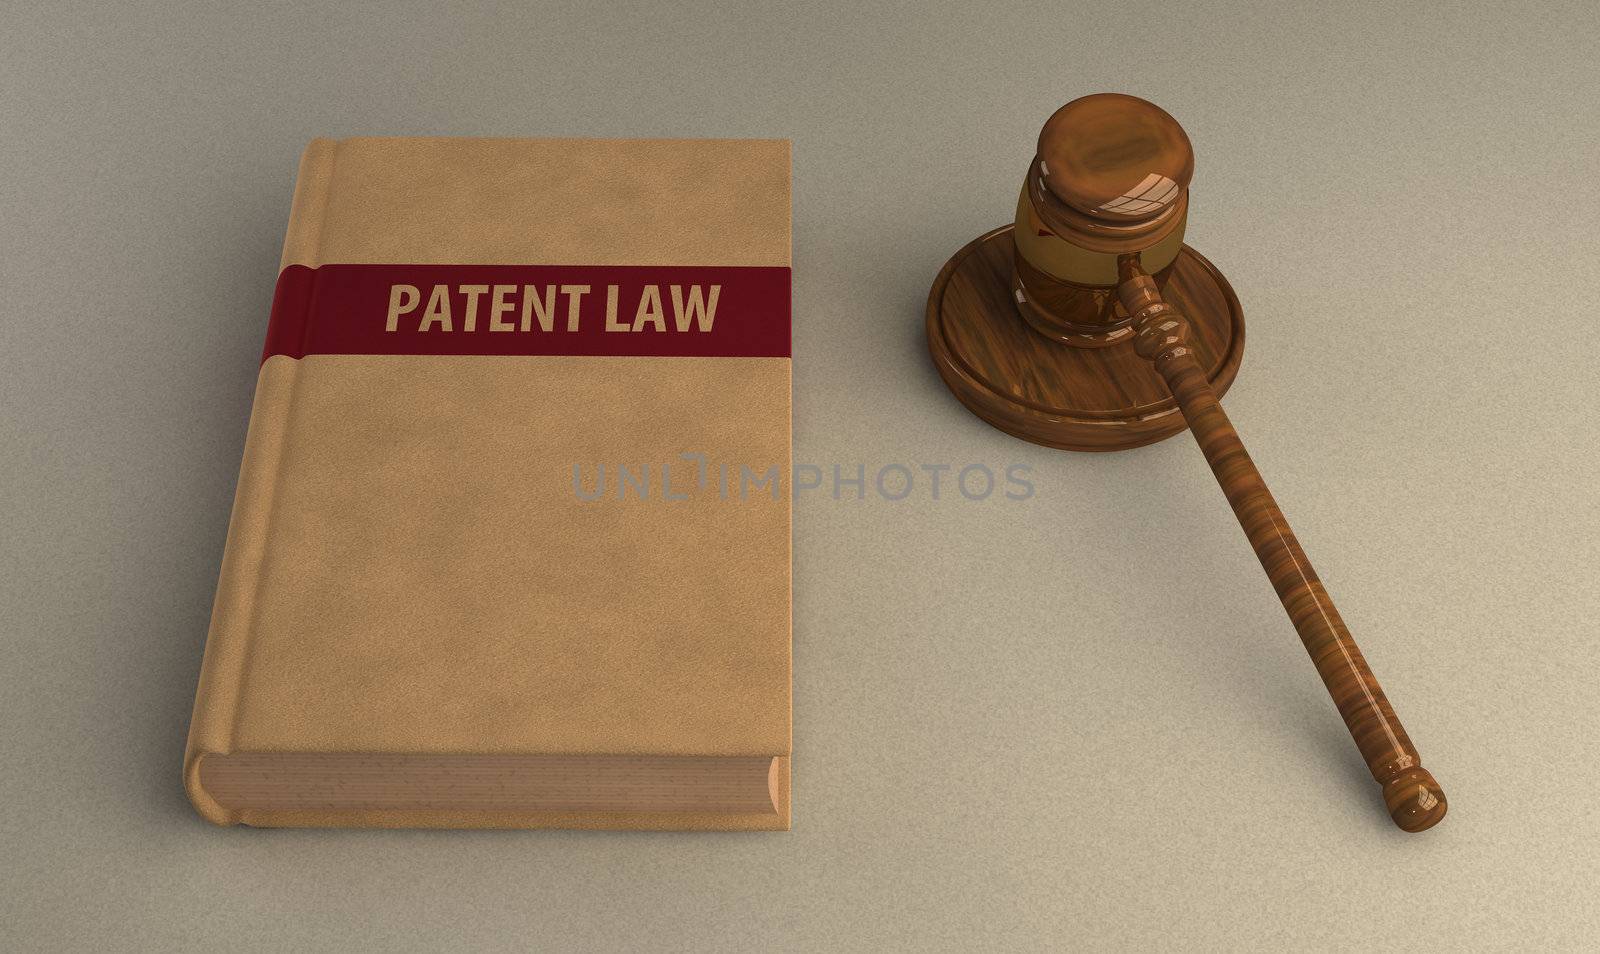 Gavel and patent law book on linen surface. Conceptual illustration